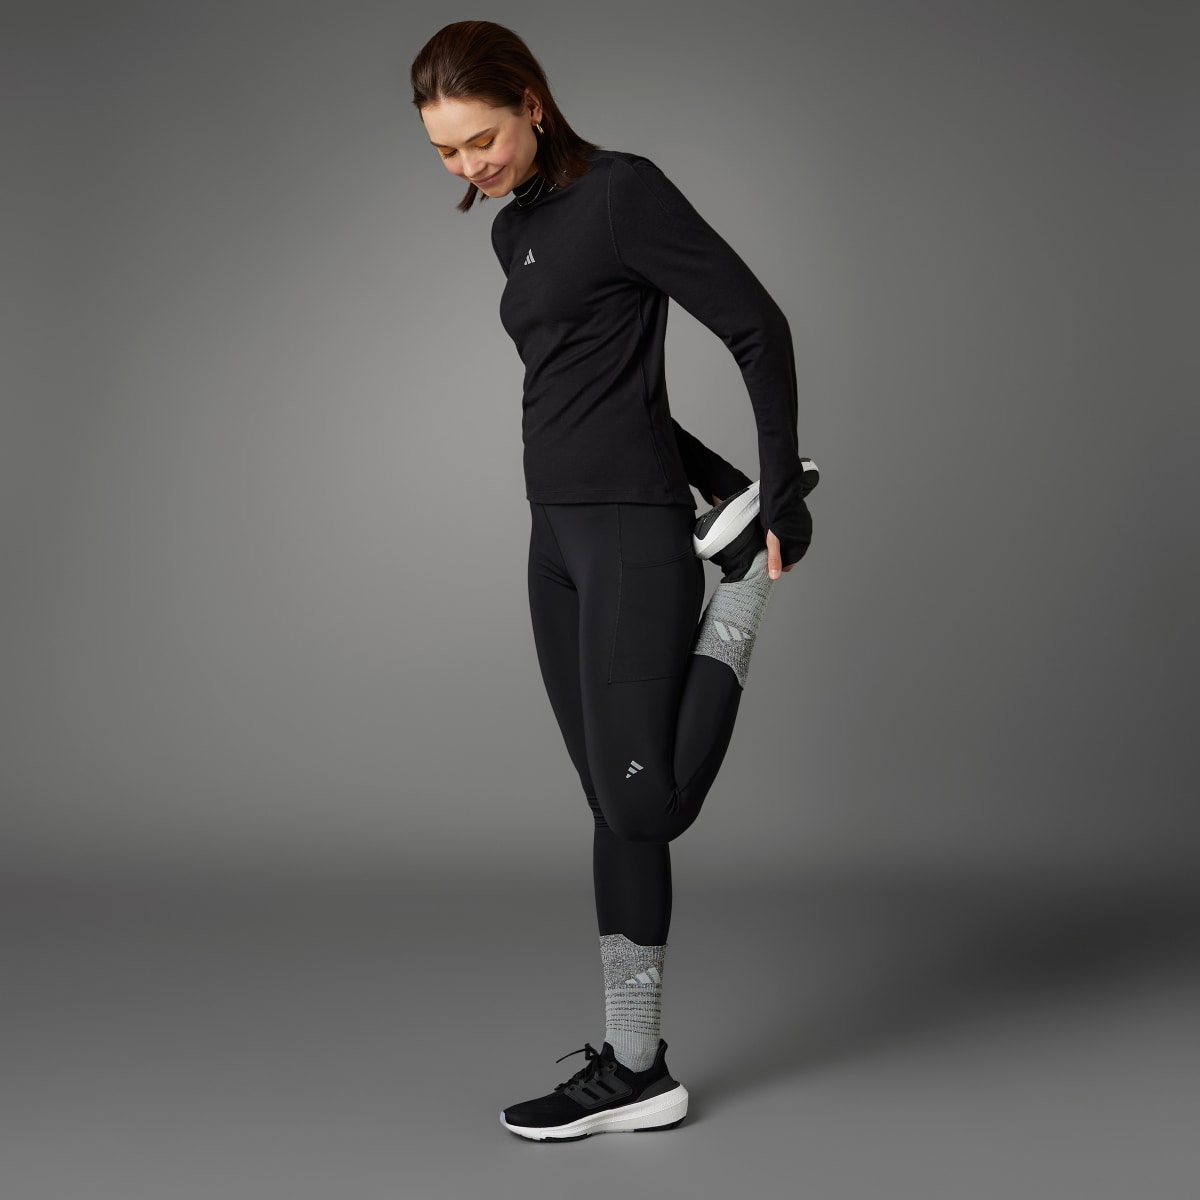 Adidas Ultimate Running Conquer the Elements Merino Long Sleeve Long-sleeve Top. 6